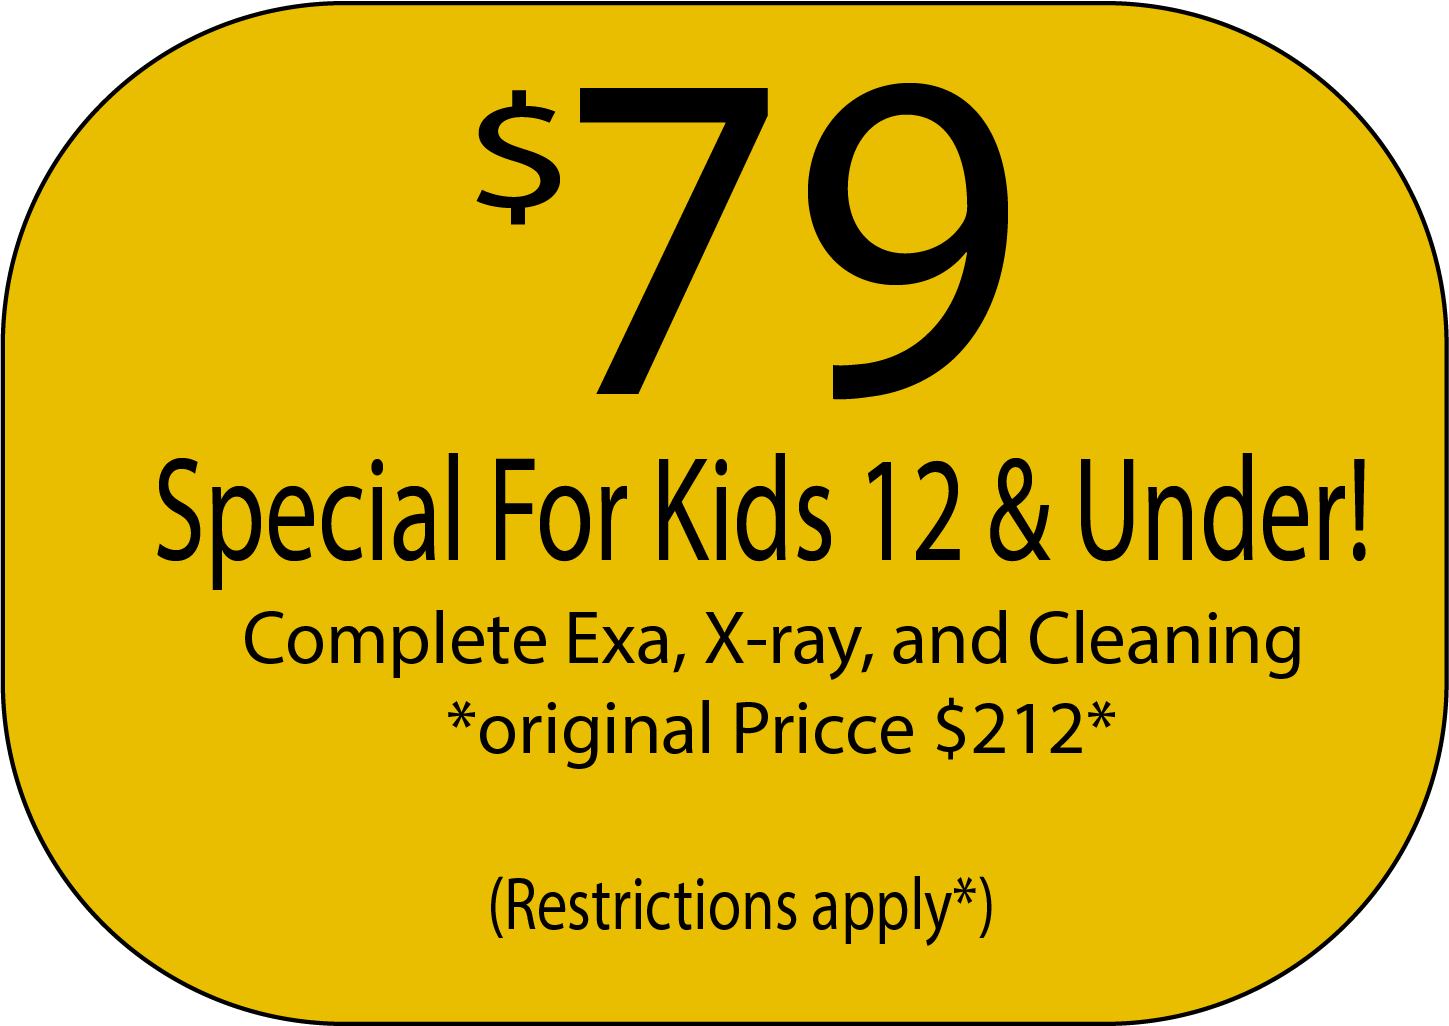 Dental Zone-Cleburne-Texas  Special for Kids 12 and under 
Compete Exam,X-rays, and Cleaning 